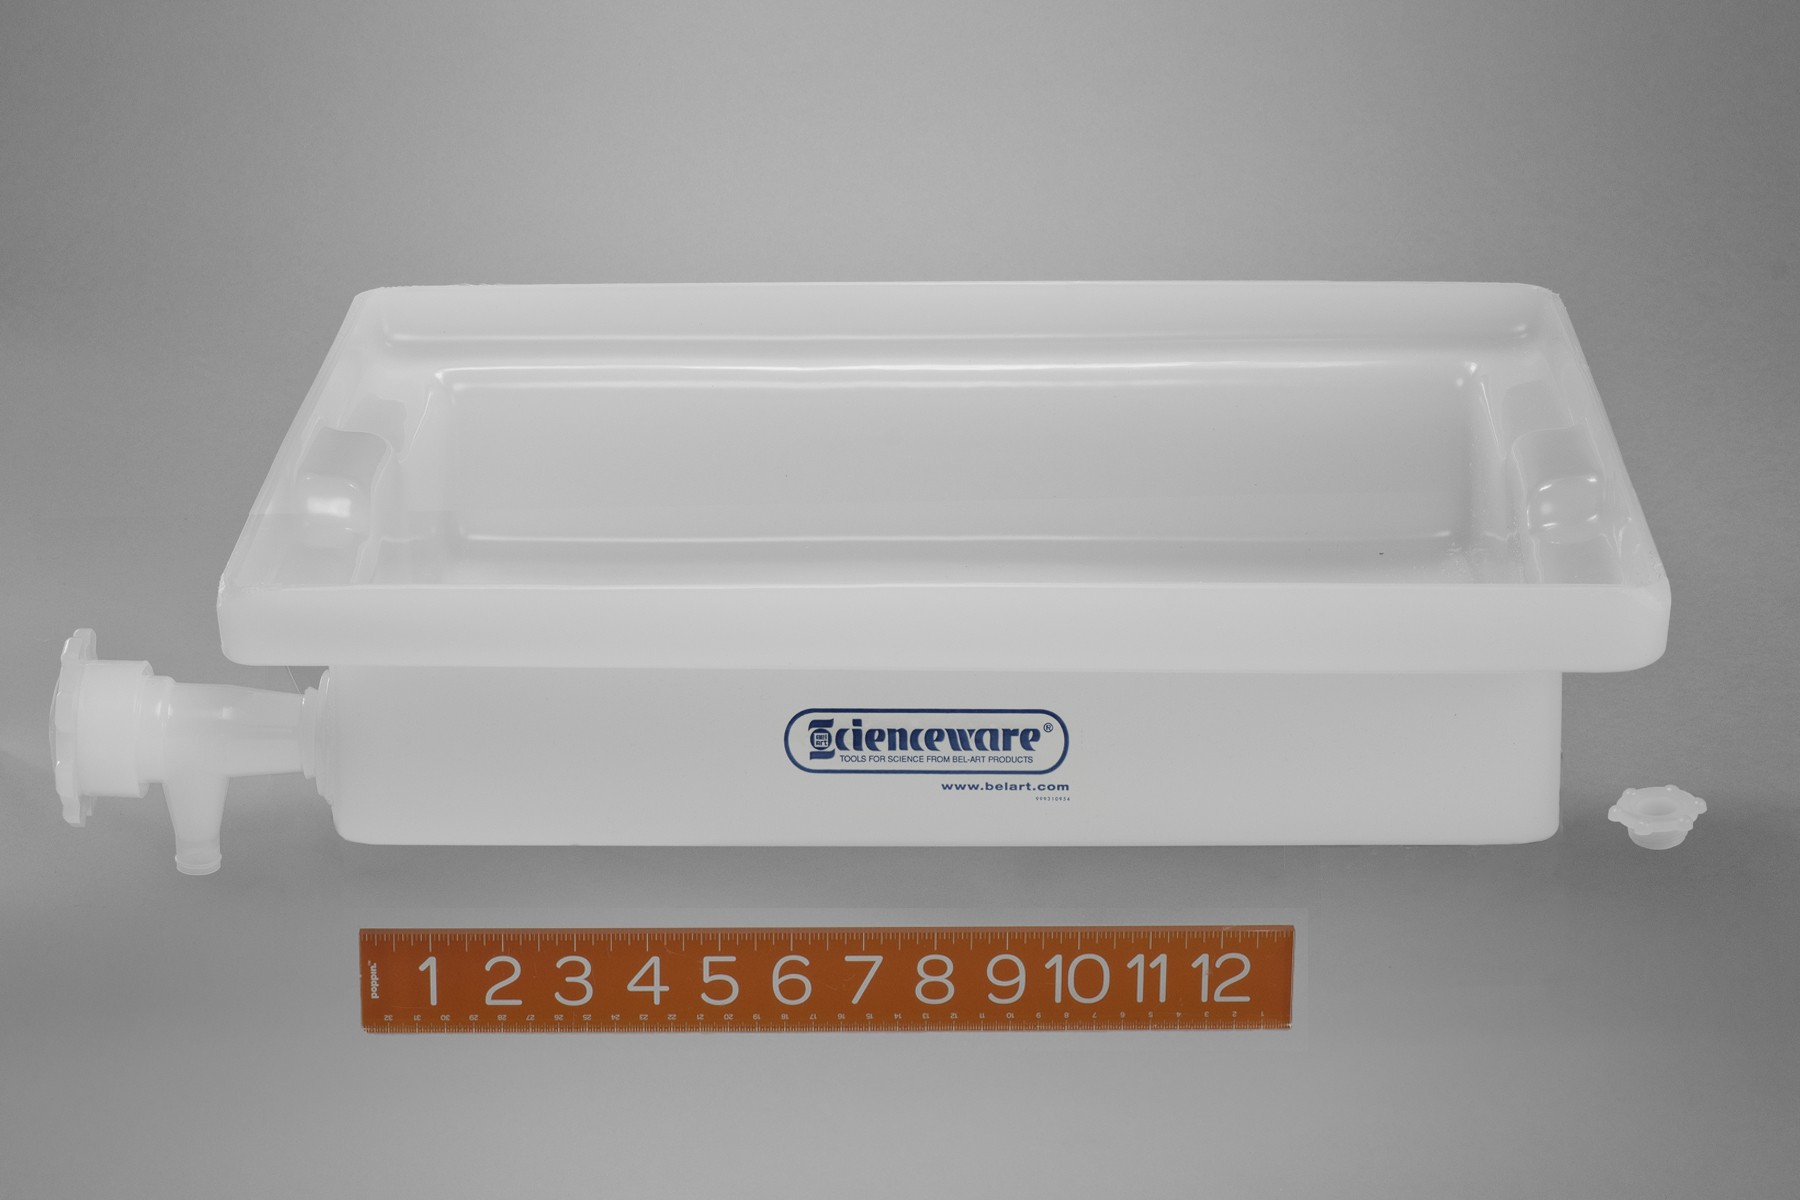 SP Bel-Art General Purpose Polyethylene Tray with Faucet; 12 x 16 x 3 in.